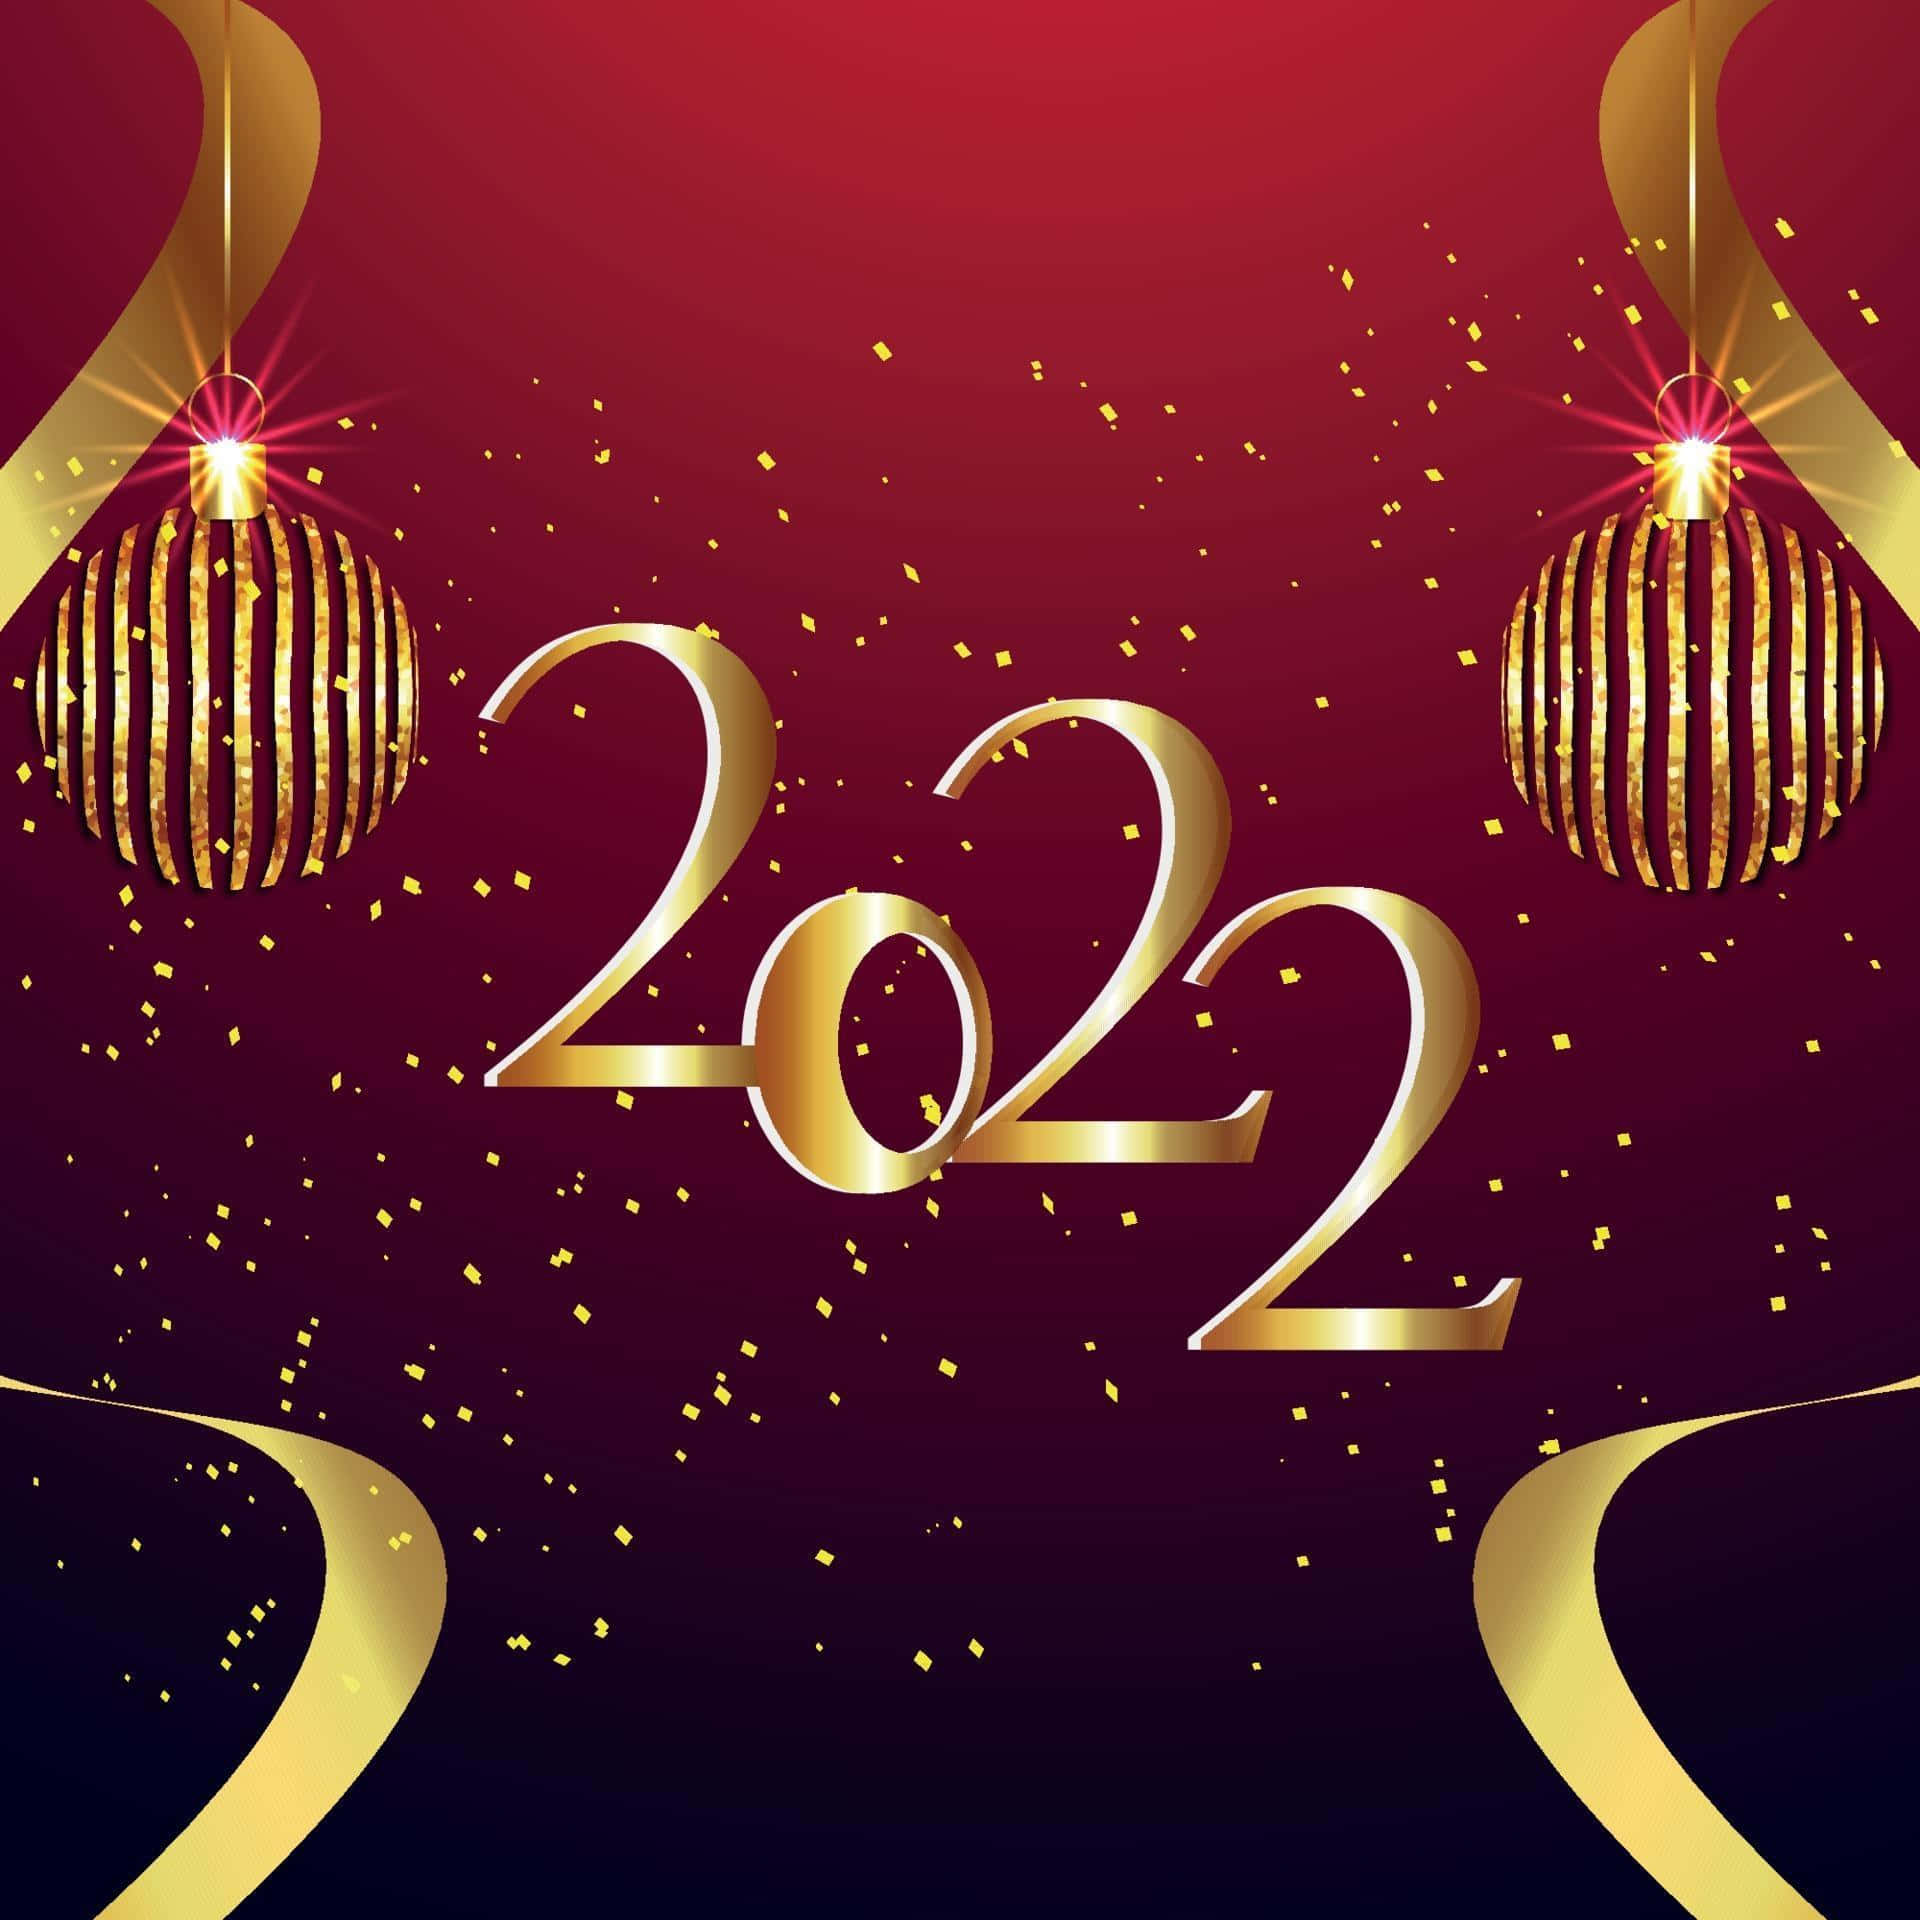 Wishing you a very Happy New Year 2022!